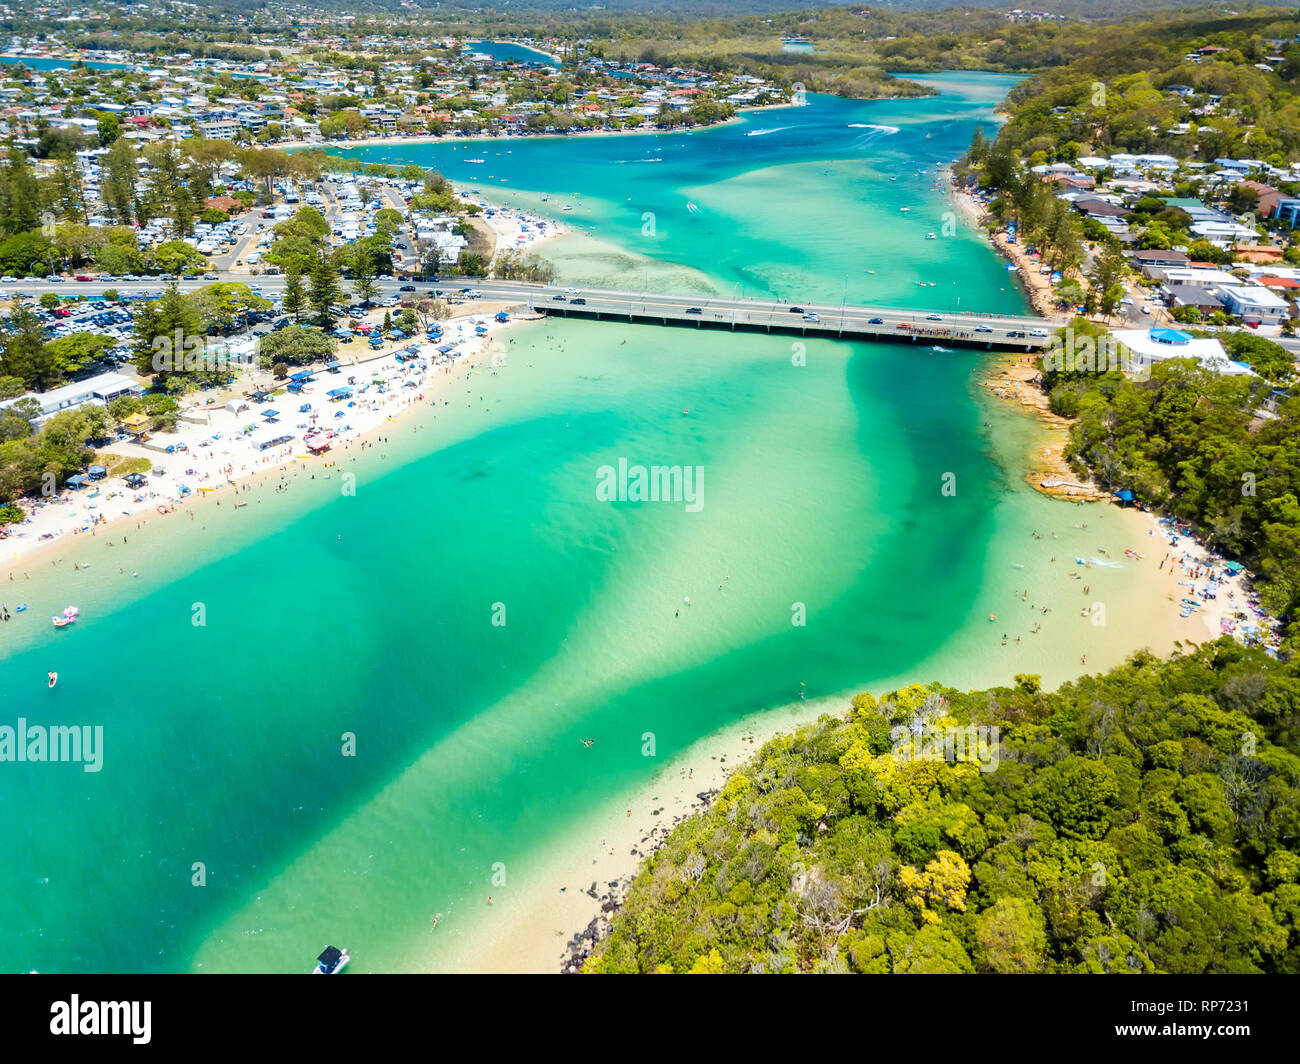 An aerial view of Tallebudgera Creek on a sunny day with blue water on the Gold Coast in Queensland, Australia Stock Photo